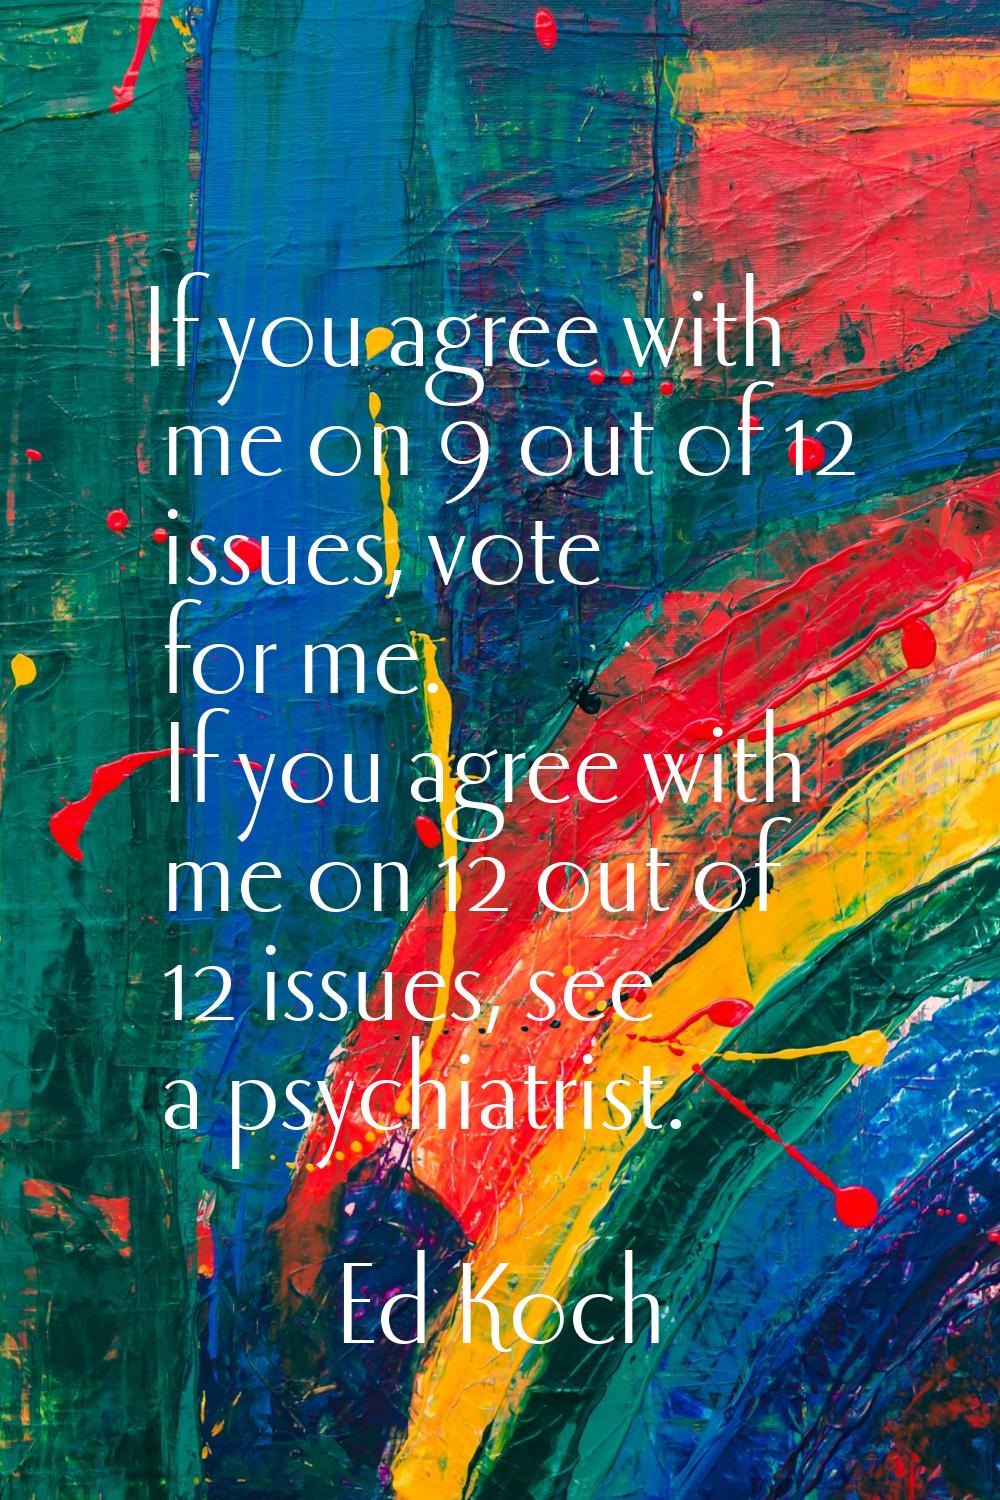 If you agree with me on 9 out of 12 issues, vote for me. If you agree with me on 12 out of 12 issue